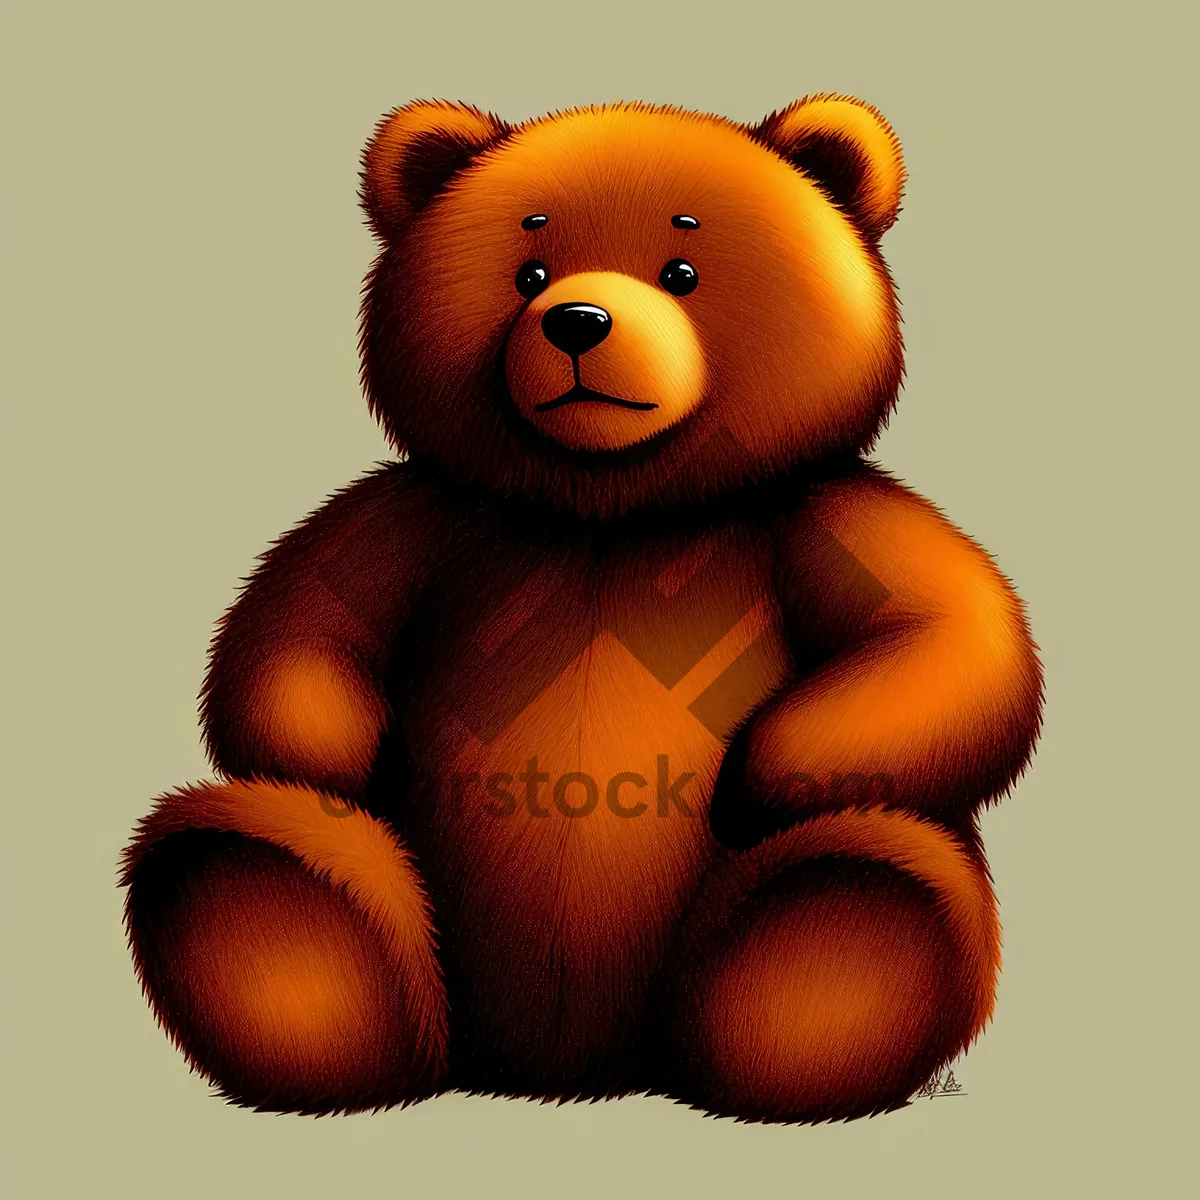 Picture of Cute Teddy Bear - Fluffy Brown Stuffed Toy